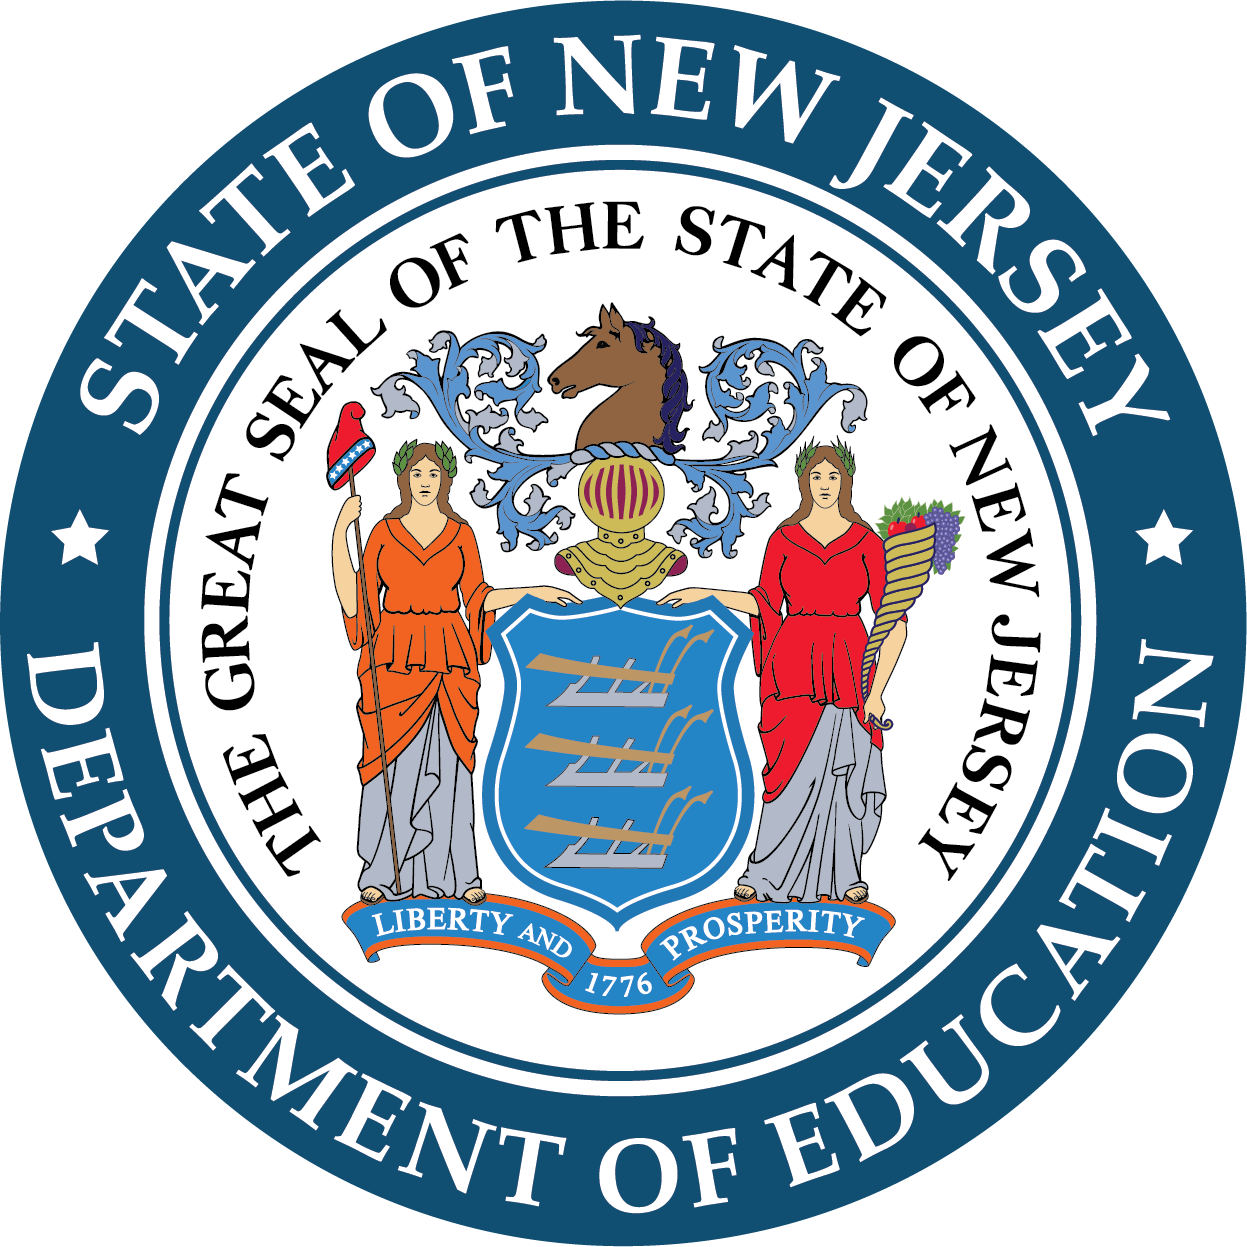 New jersey department of education logo